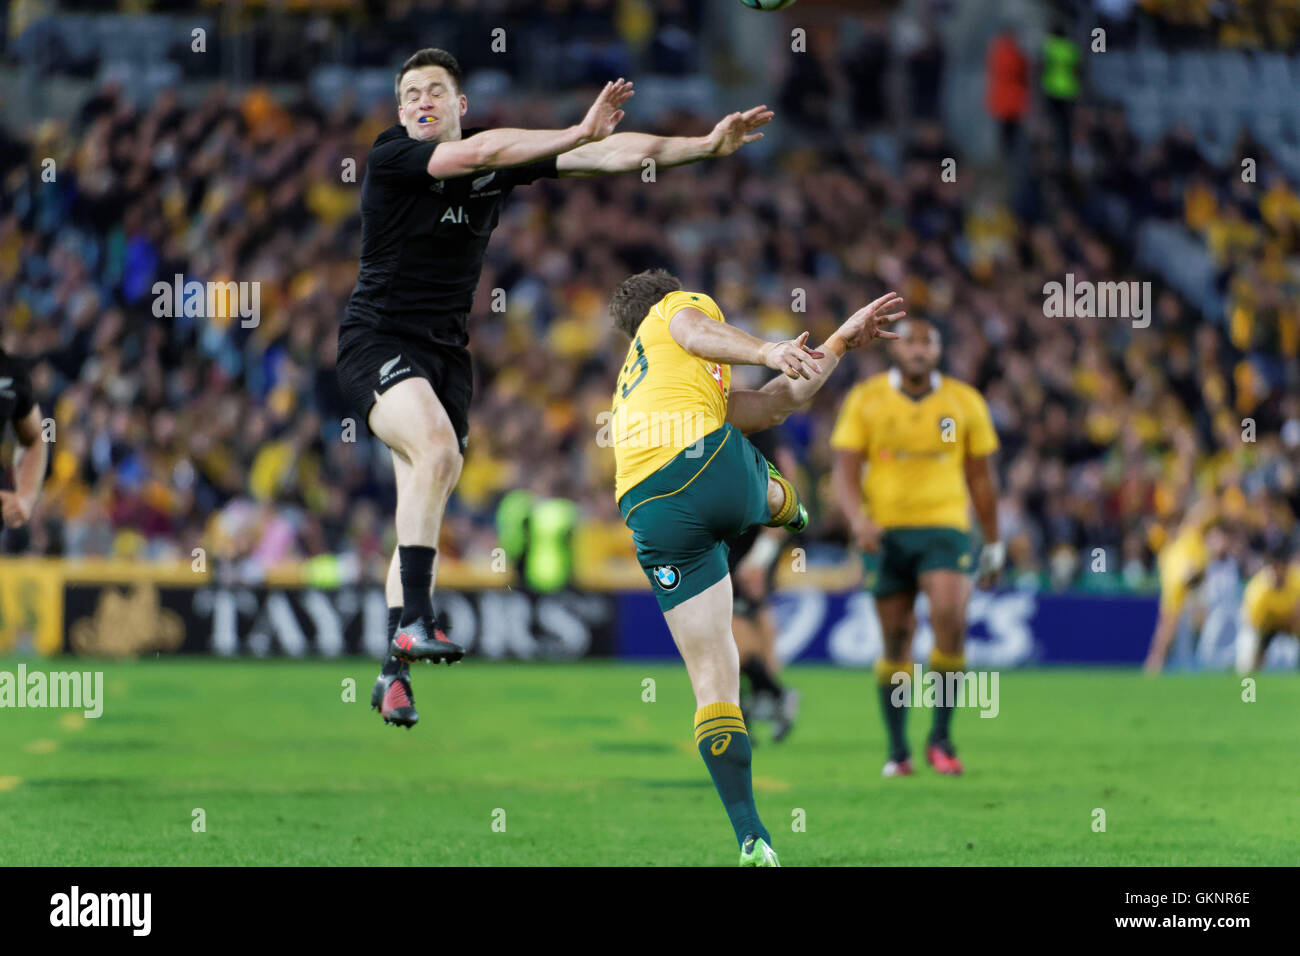 Sydney, Australia. 20th Aug, 2016. New Zealand tries to stop a kick by Australia's Rob Horne (23) kicks during the first rugby union test match between Australian Wallabies and New Zealand All Blacks. New Zealand won the first match 42-8 at ANZ Stadium and 1-0 in the Bledisloe Cup annual three-match series. Credit:  Hugh Peterswald/Pacific Press/Alamy Live News Stock Photo